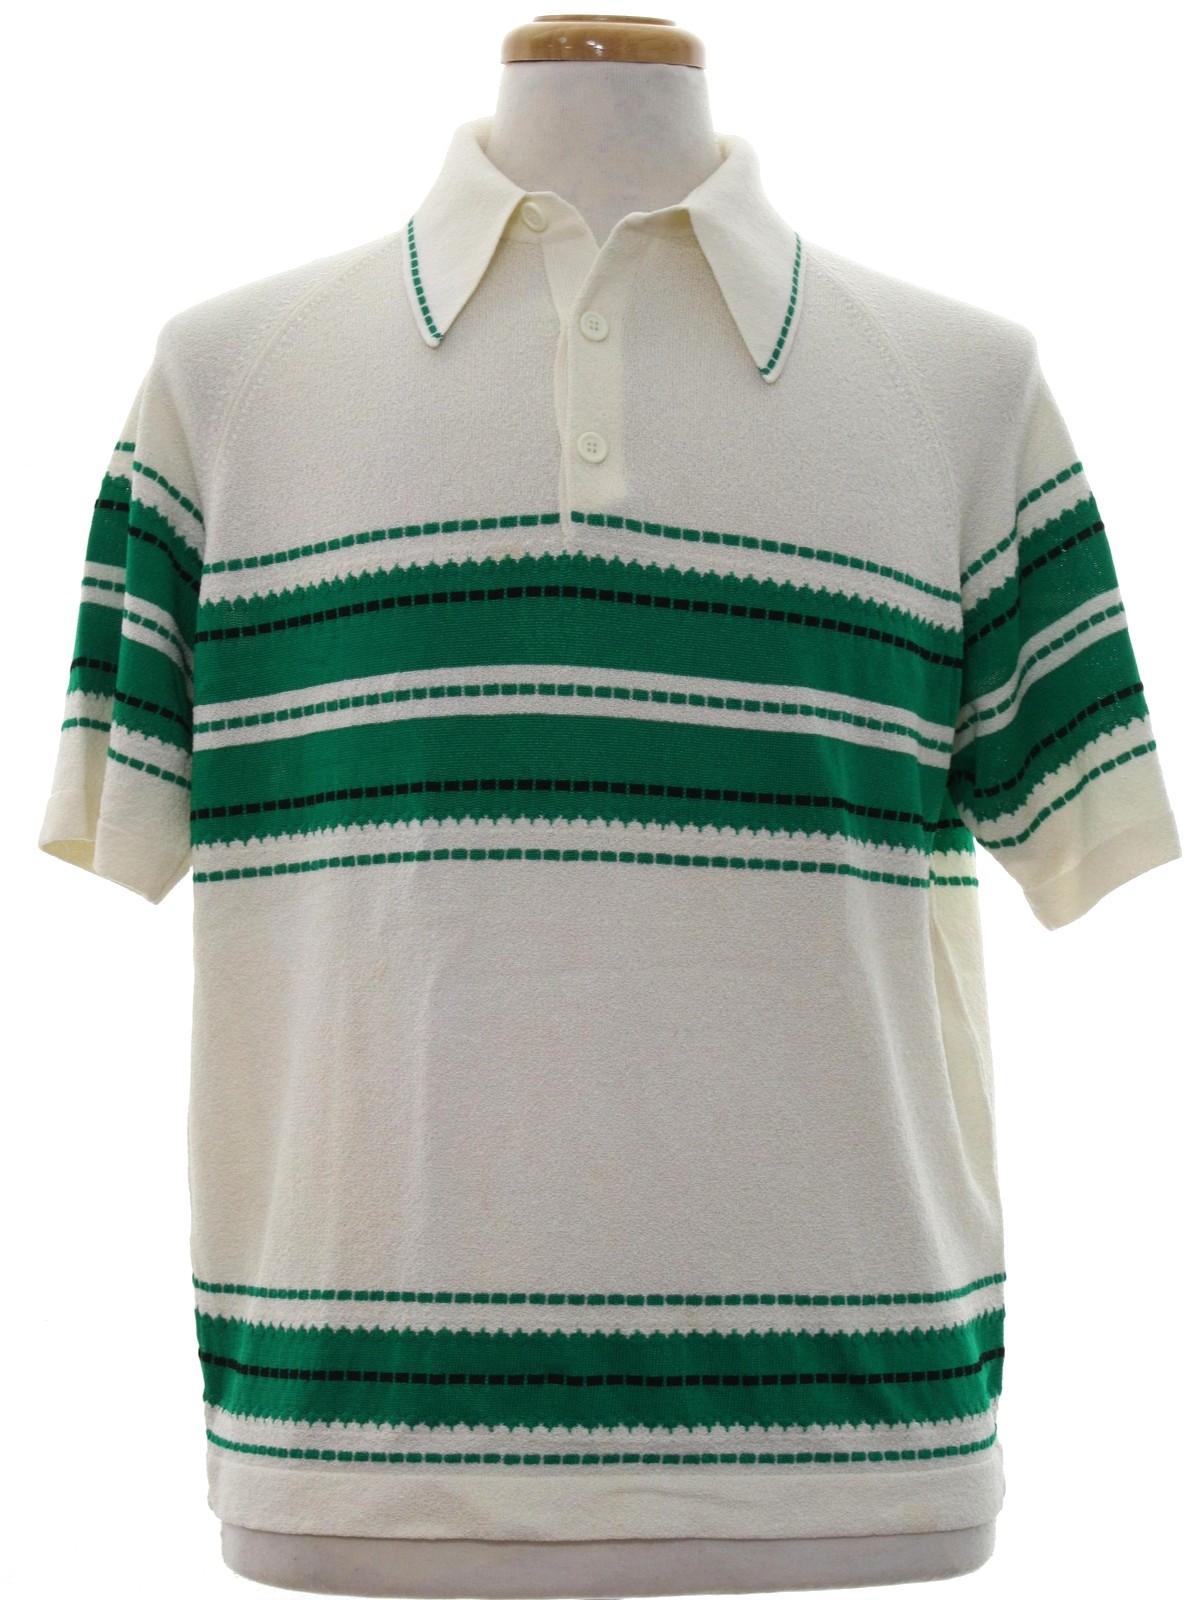 Vintage Donegal 1970s Knit Shirt: 70s -Donegal- Mens ivory, green and ...